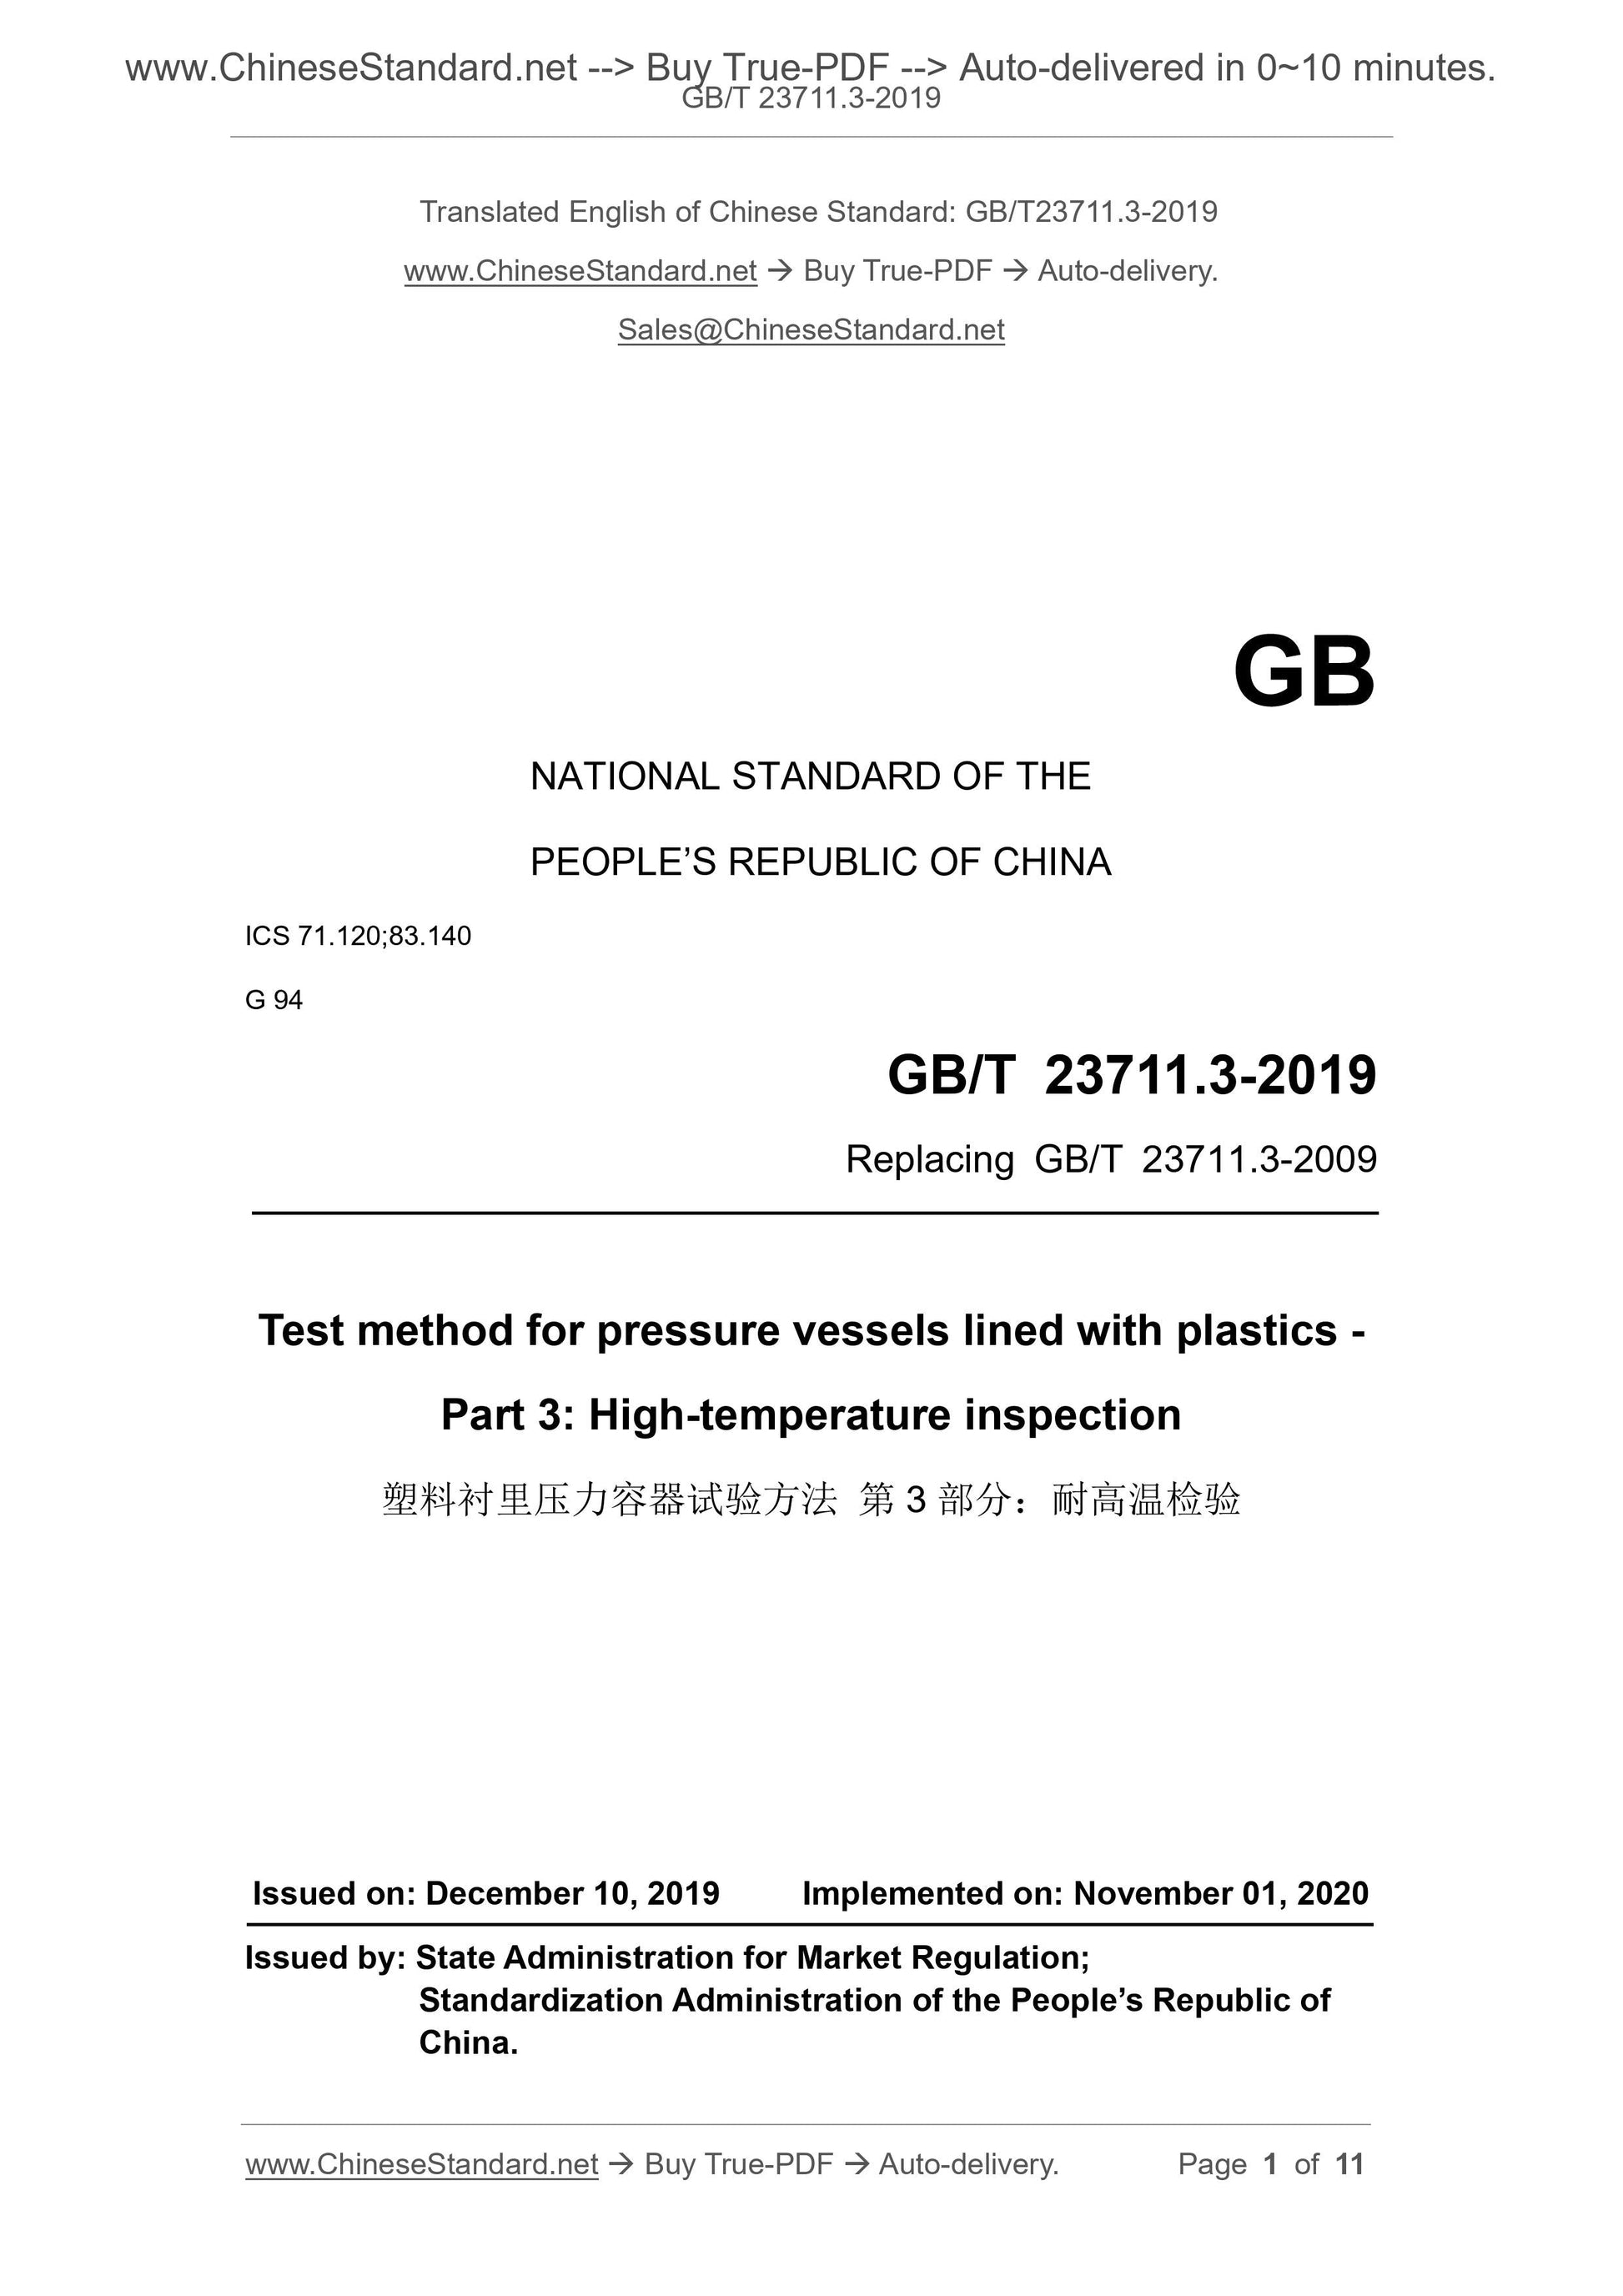 GB/T 23711.3-2019 Page 1